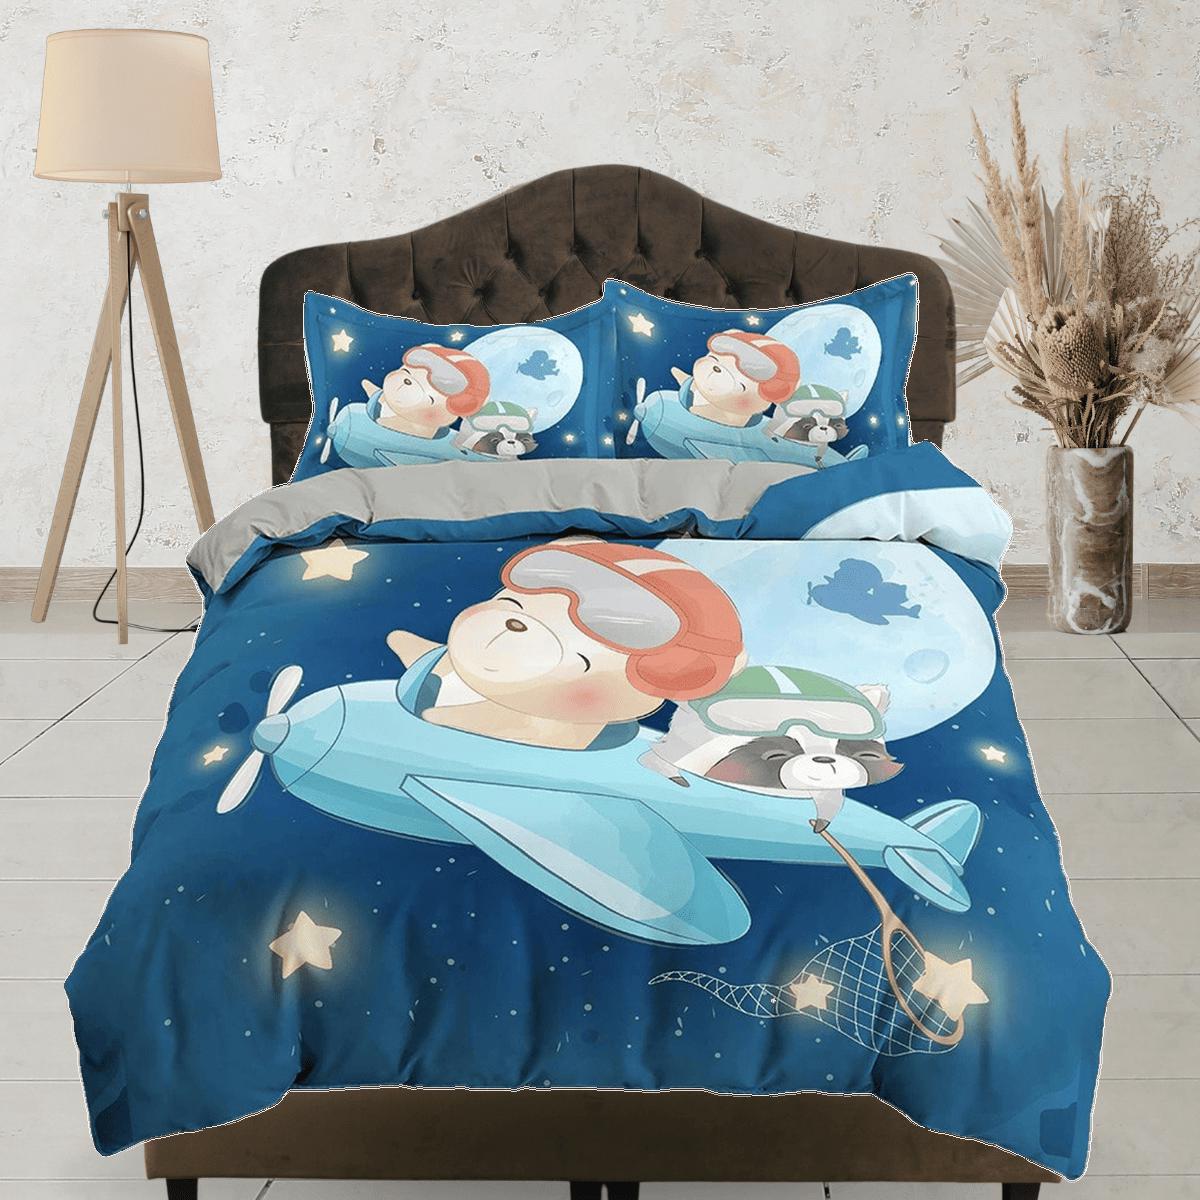 Flying Teddy Bear and Dog in Airplane Bedding, Duvet Cover Set, Zipper